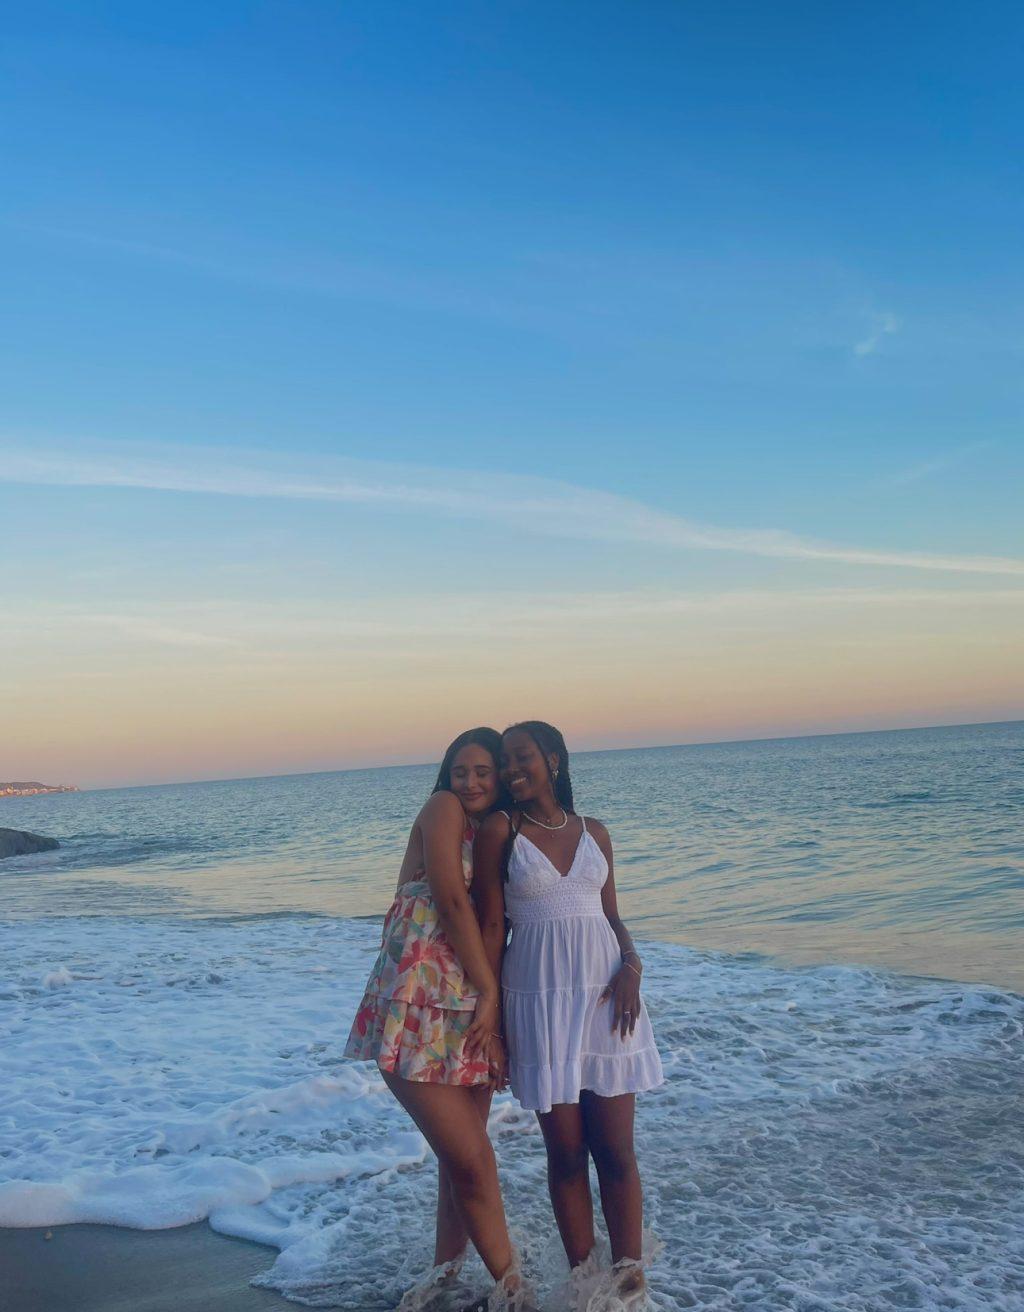 Sanchez-Jimenez and her sorority big — sophomore Chantal Mbayah — pose together at the beach. Sanchez-Jimenez said Mbayah has been a huge mentor to her in finding where she belongs at Pepperdine. Photo courtesy of Bardaliss Sanchez-Jimenez